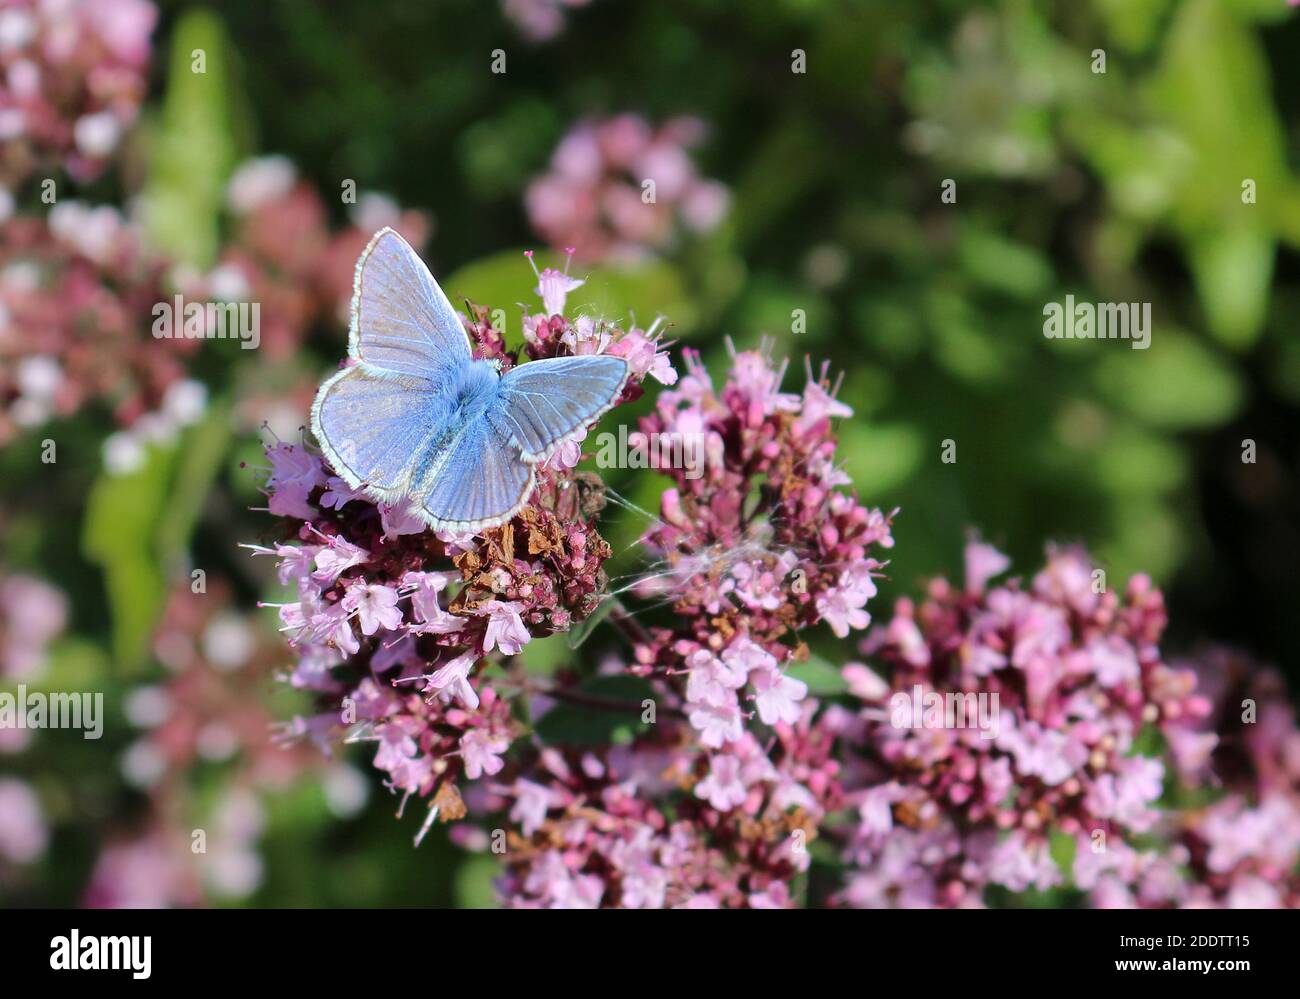 Small blue butterfly, Cupido minimus on pink flower Stock Photo